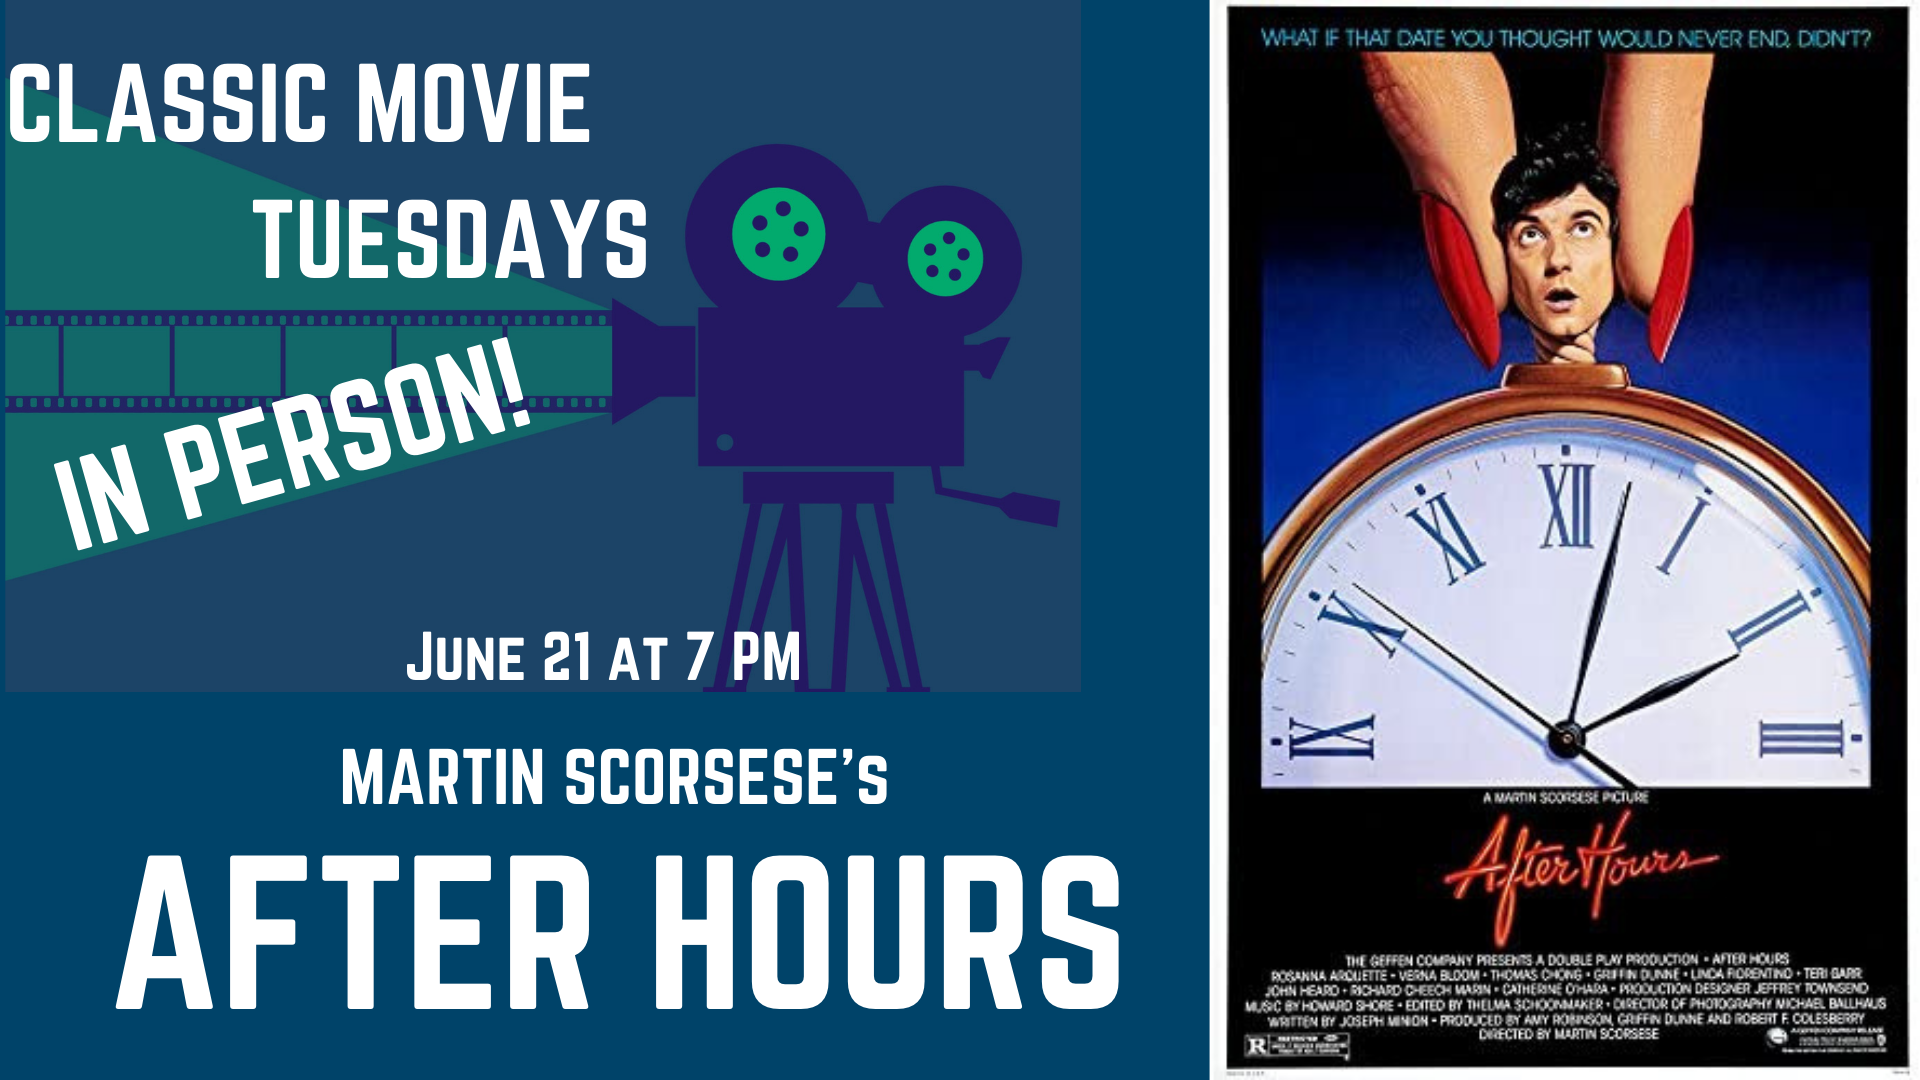 Banner advertising our screening of AFTER HOURS on June 21 at 7 PM, featuring the original 1985 movie poster.